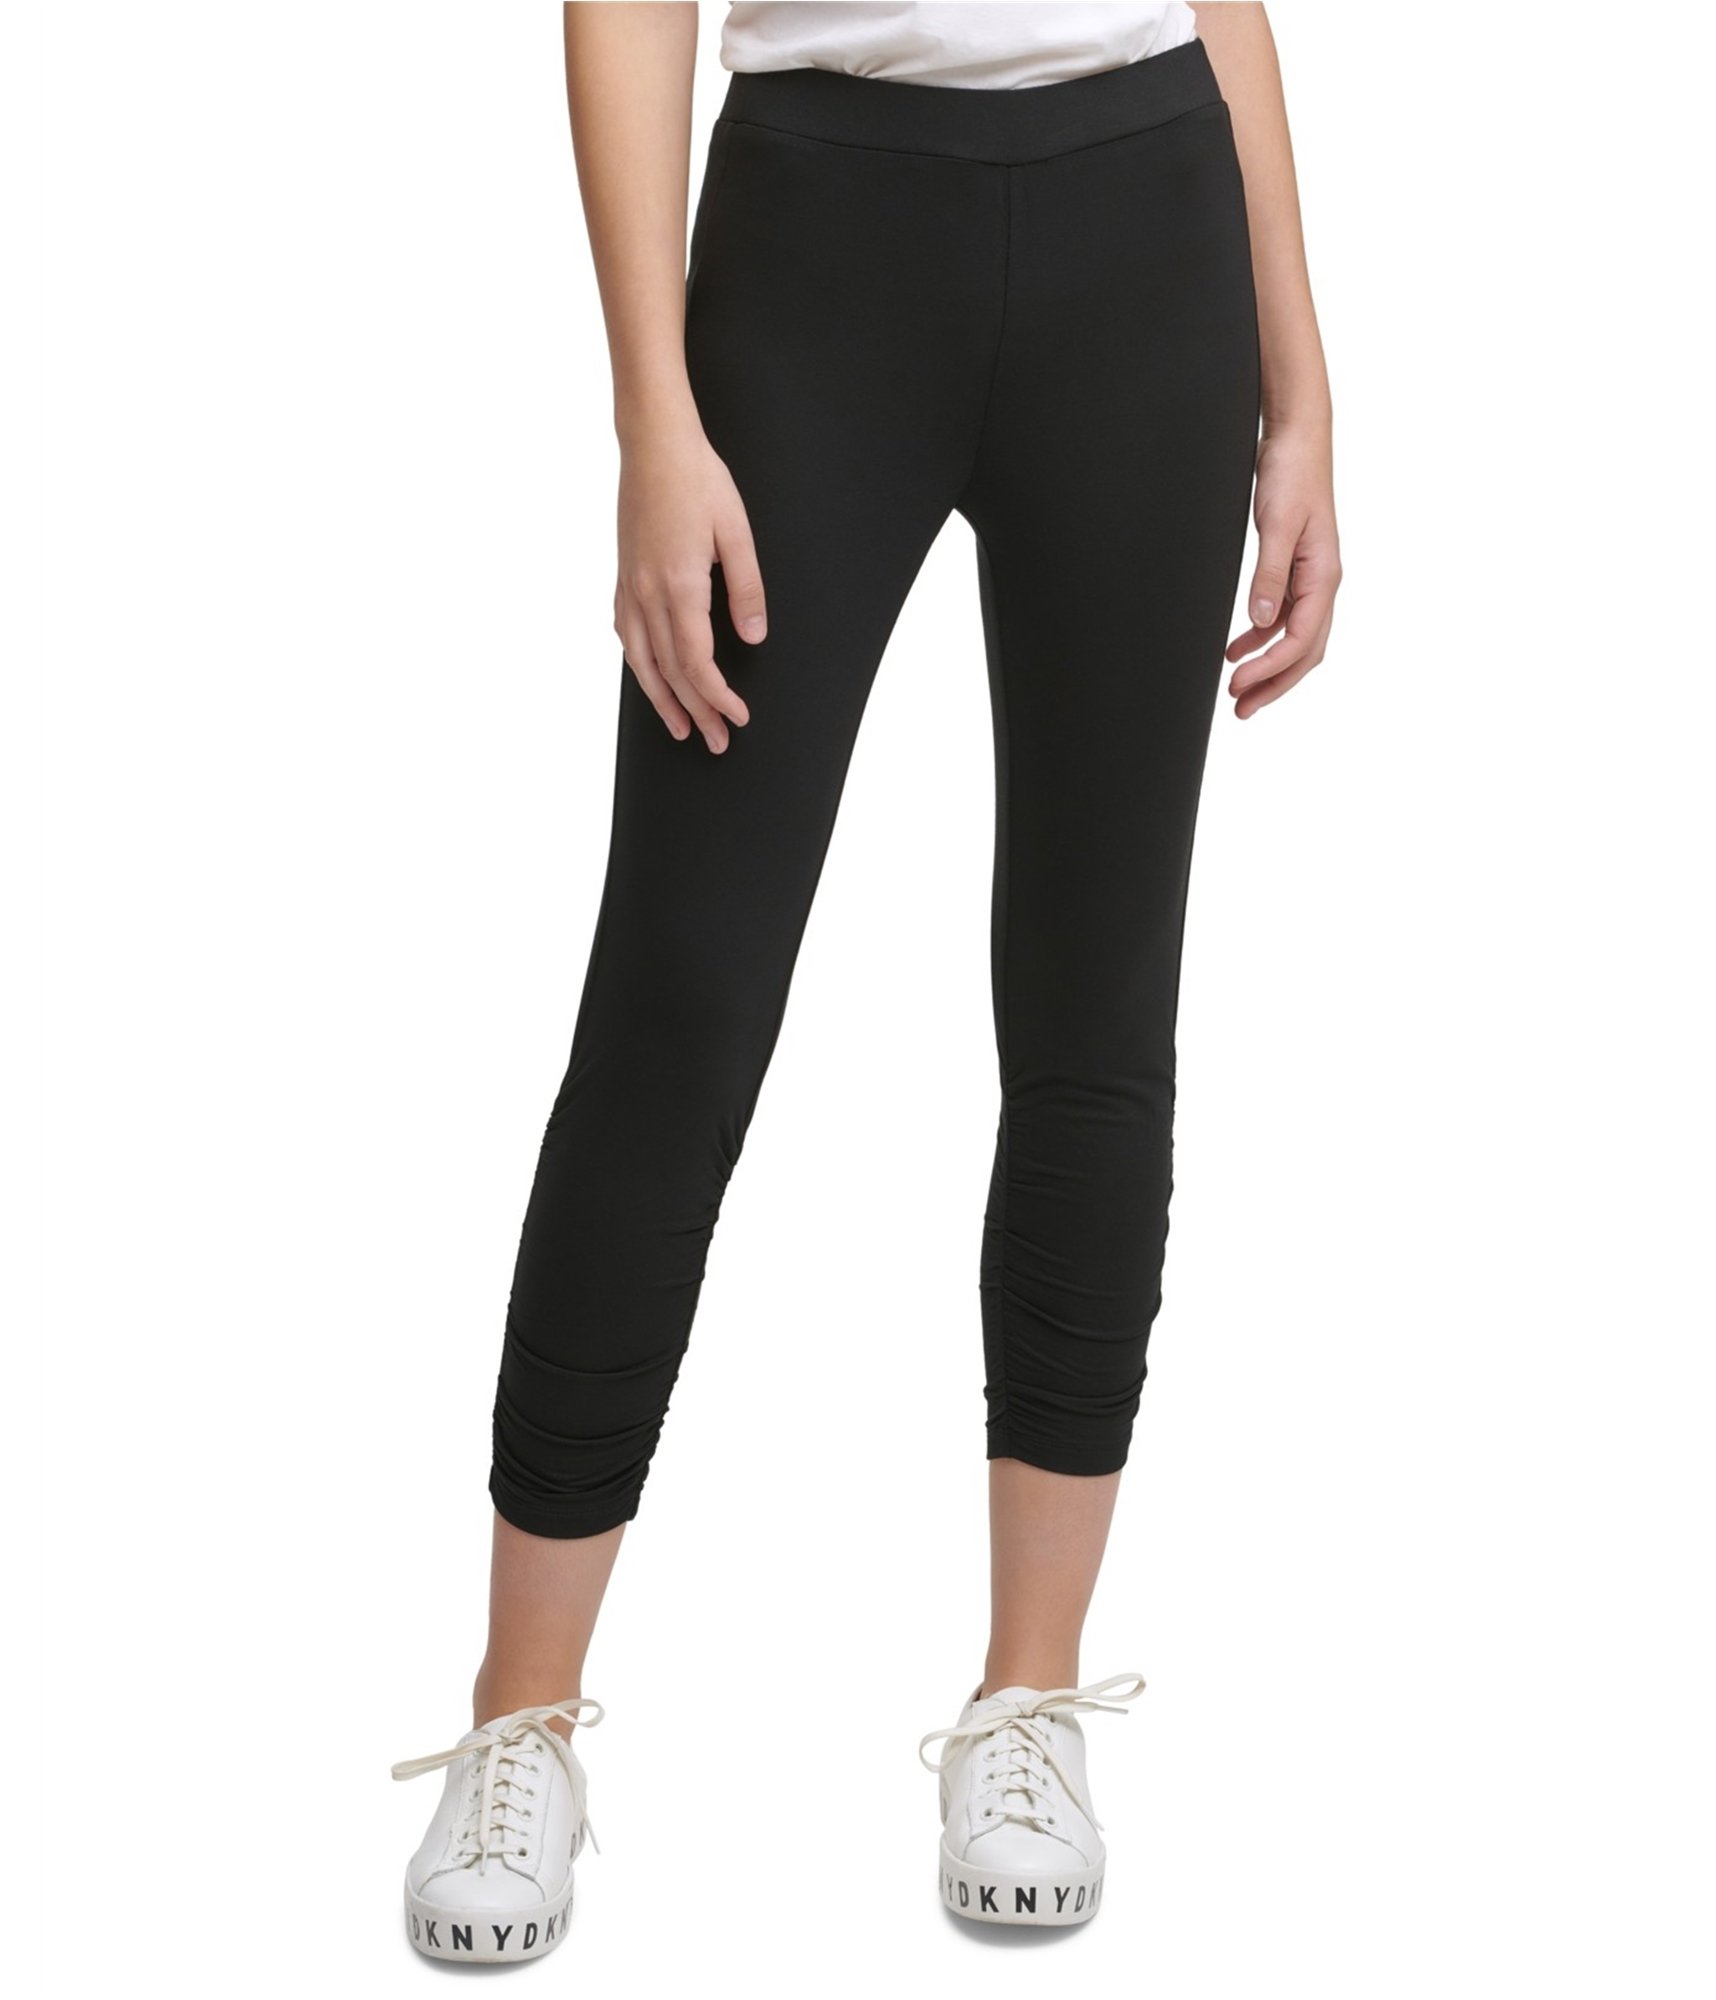 Buy a Dkny Womens Ruched Casual Leggings